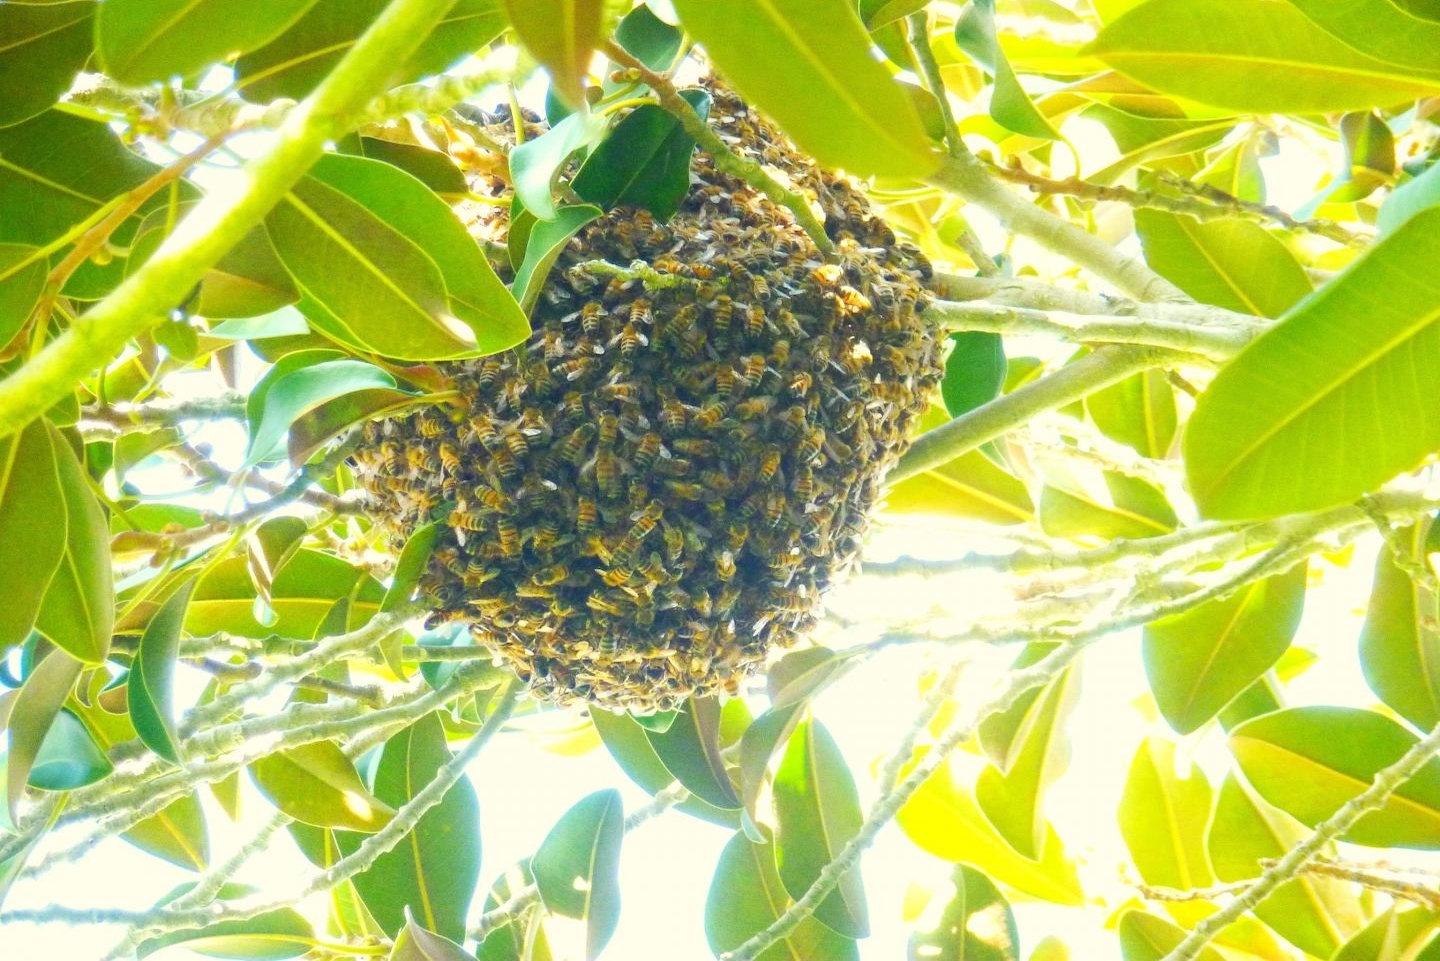 Bees swarming together in a tree